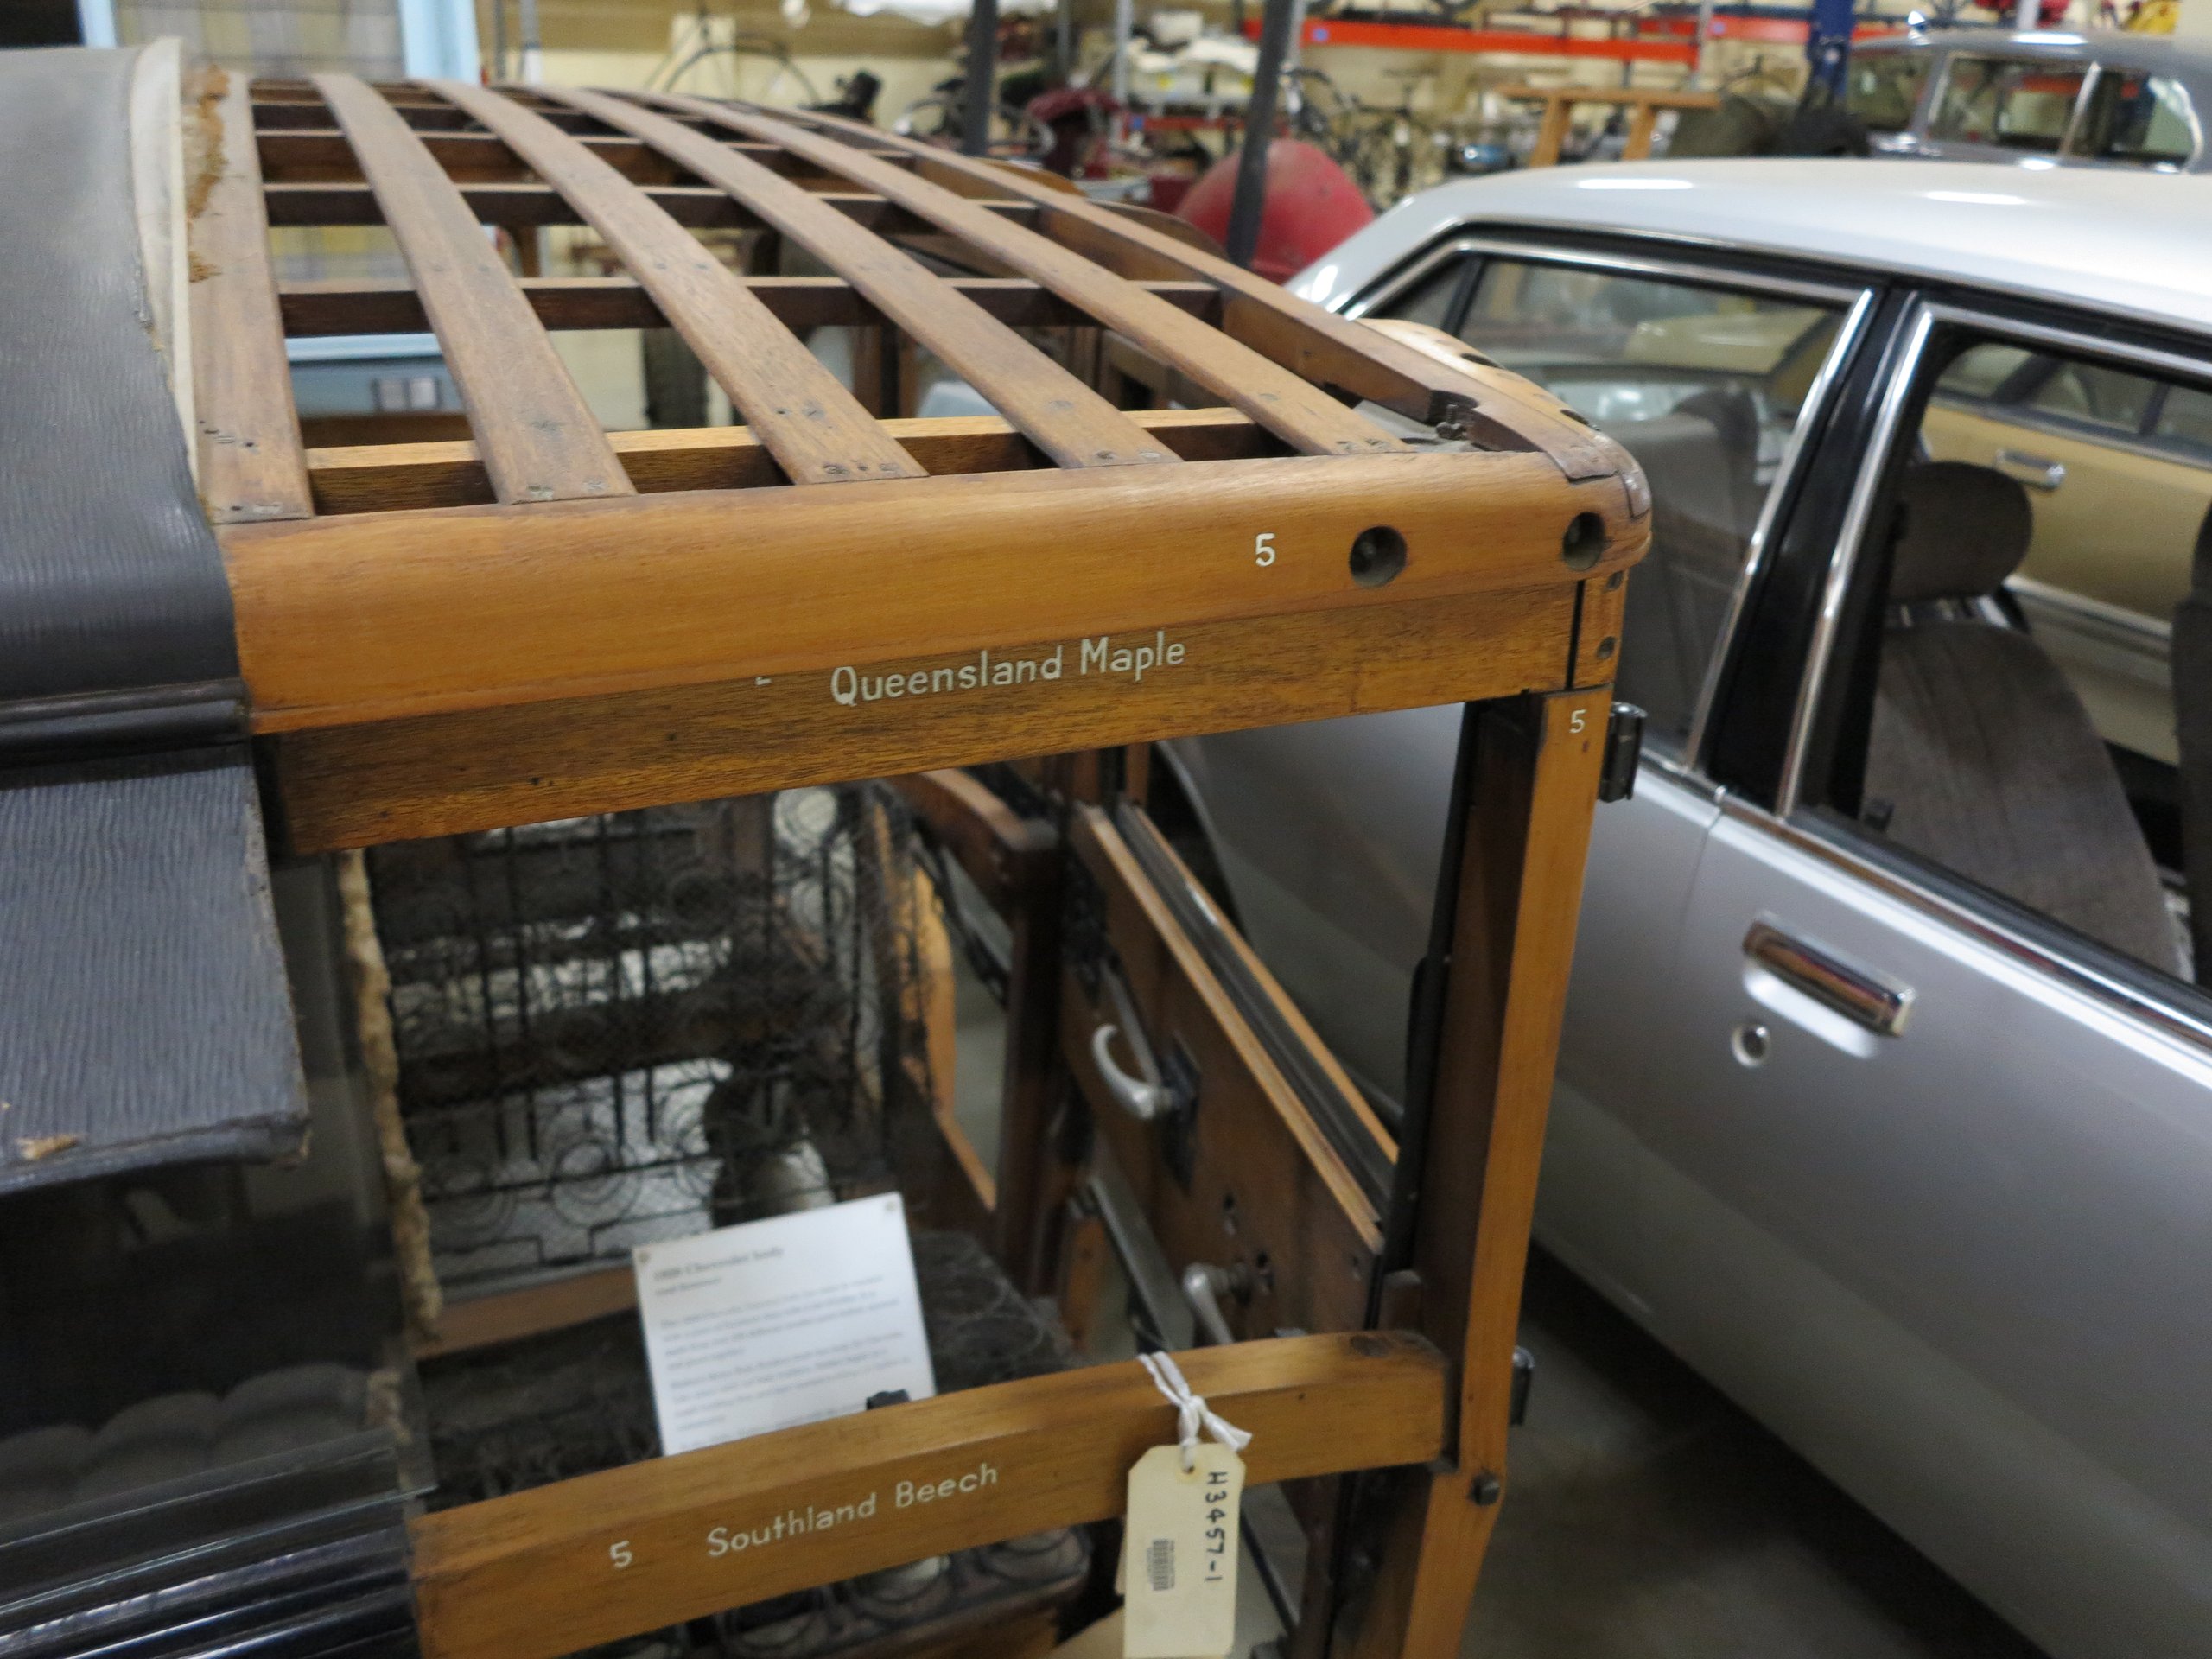 Full size sectioned Chrysler automobile body